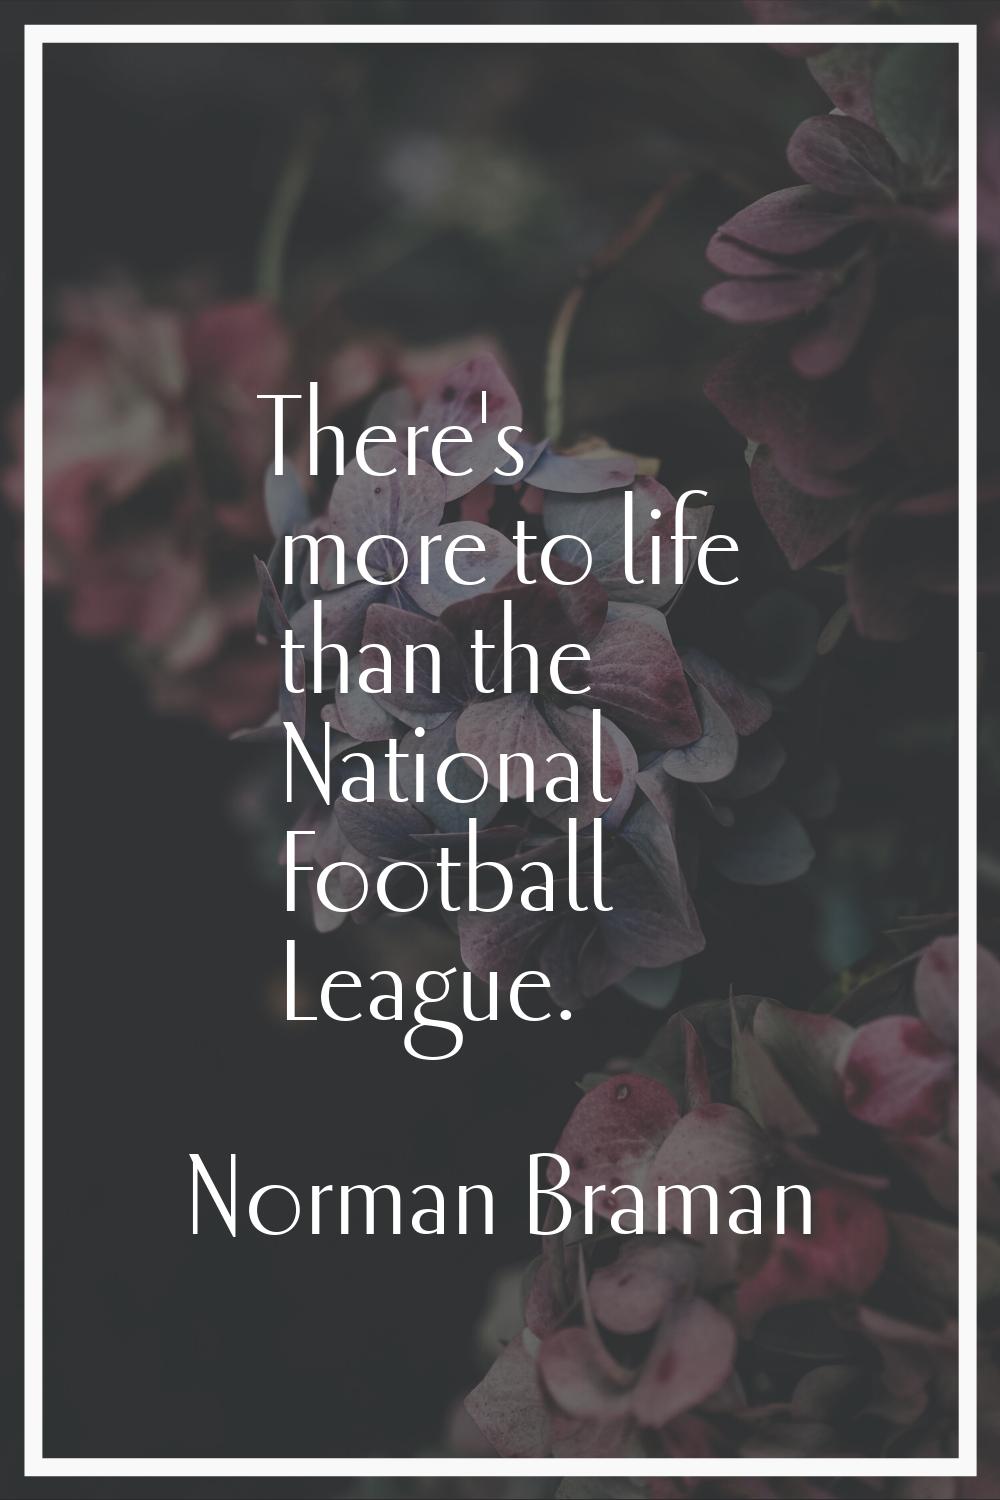 There's more to life than the National Football League.